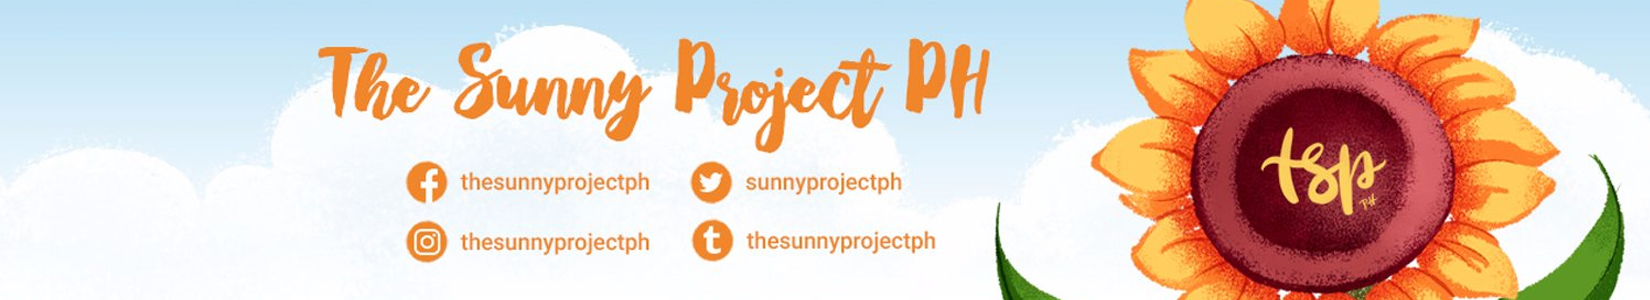 The Sunny Project PH